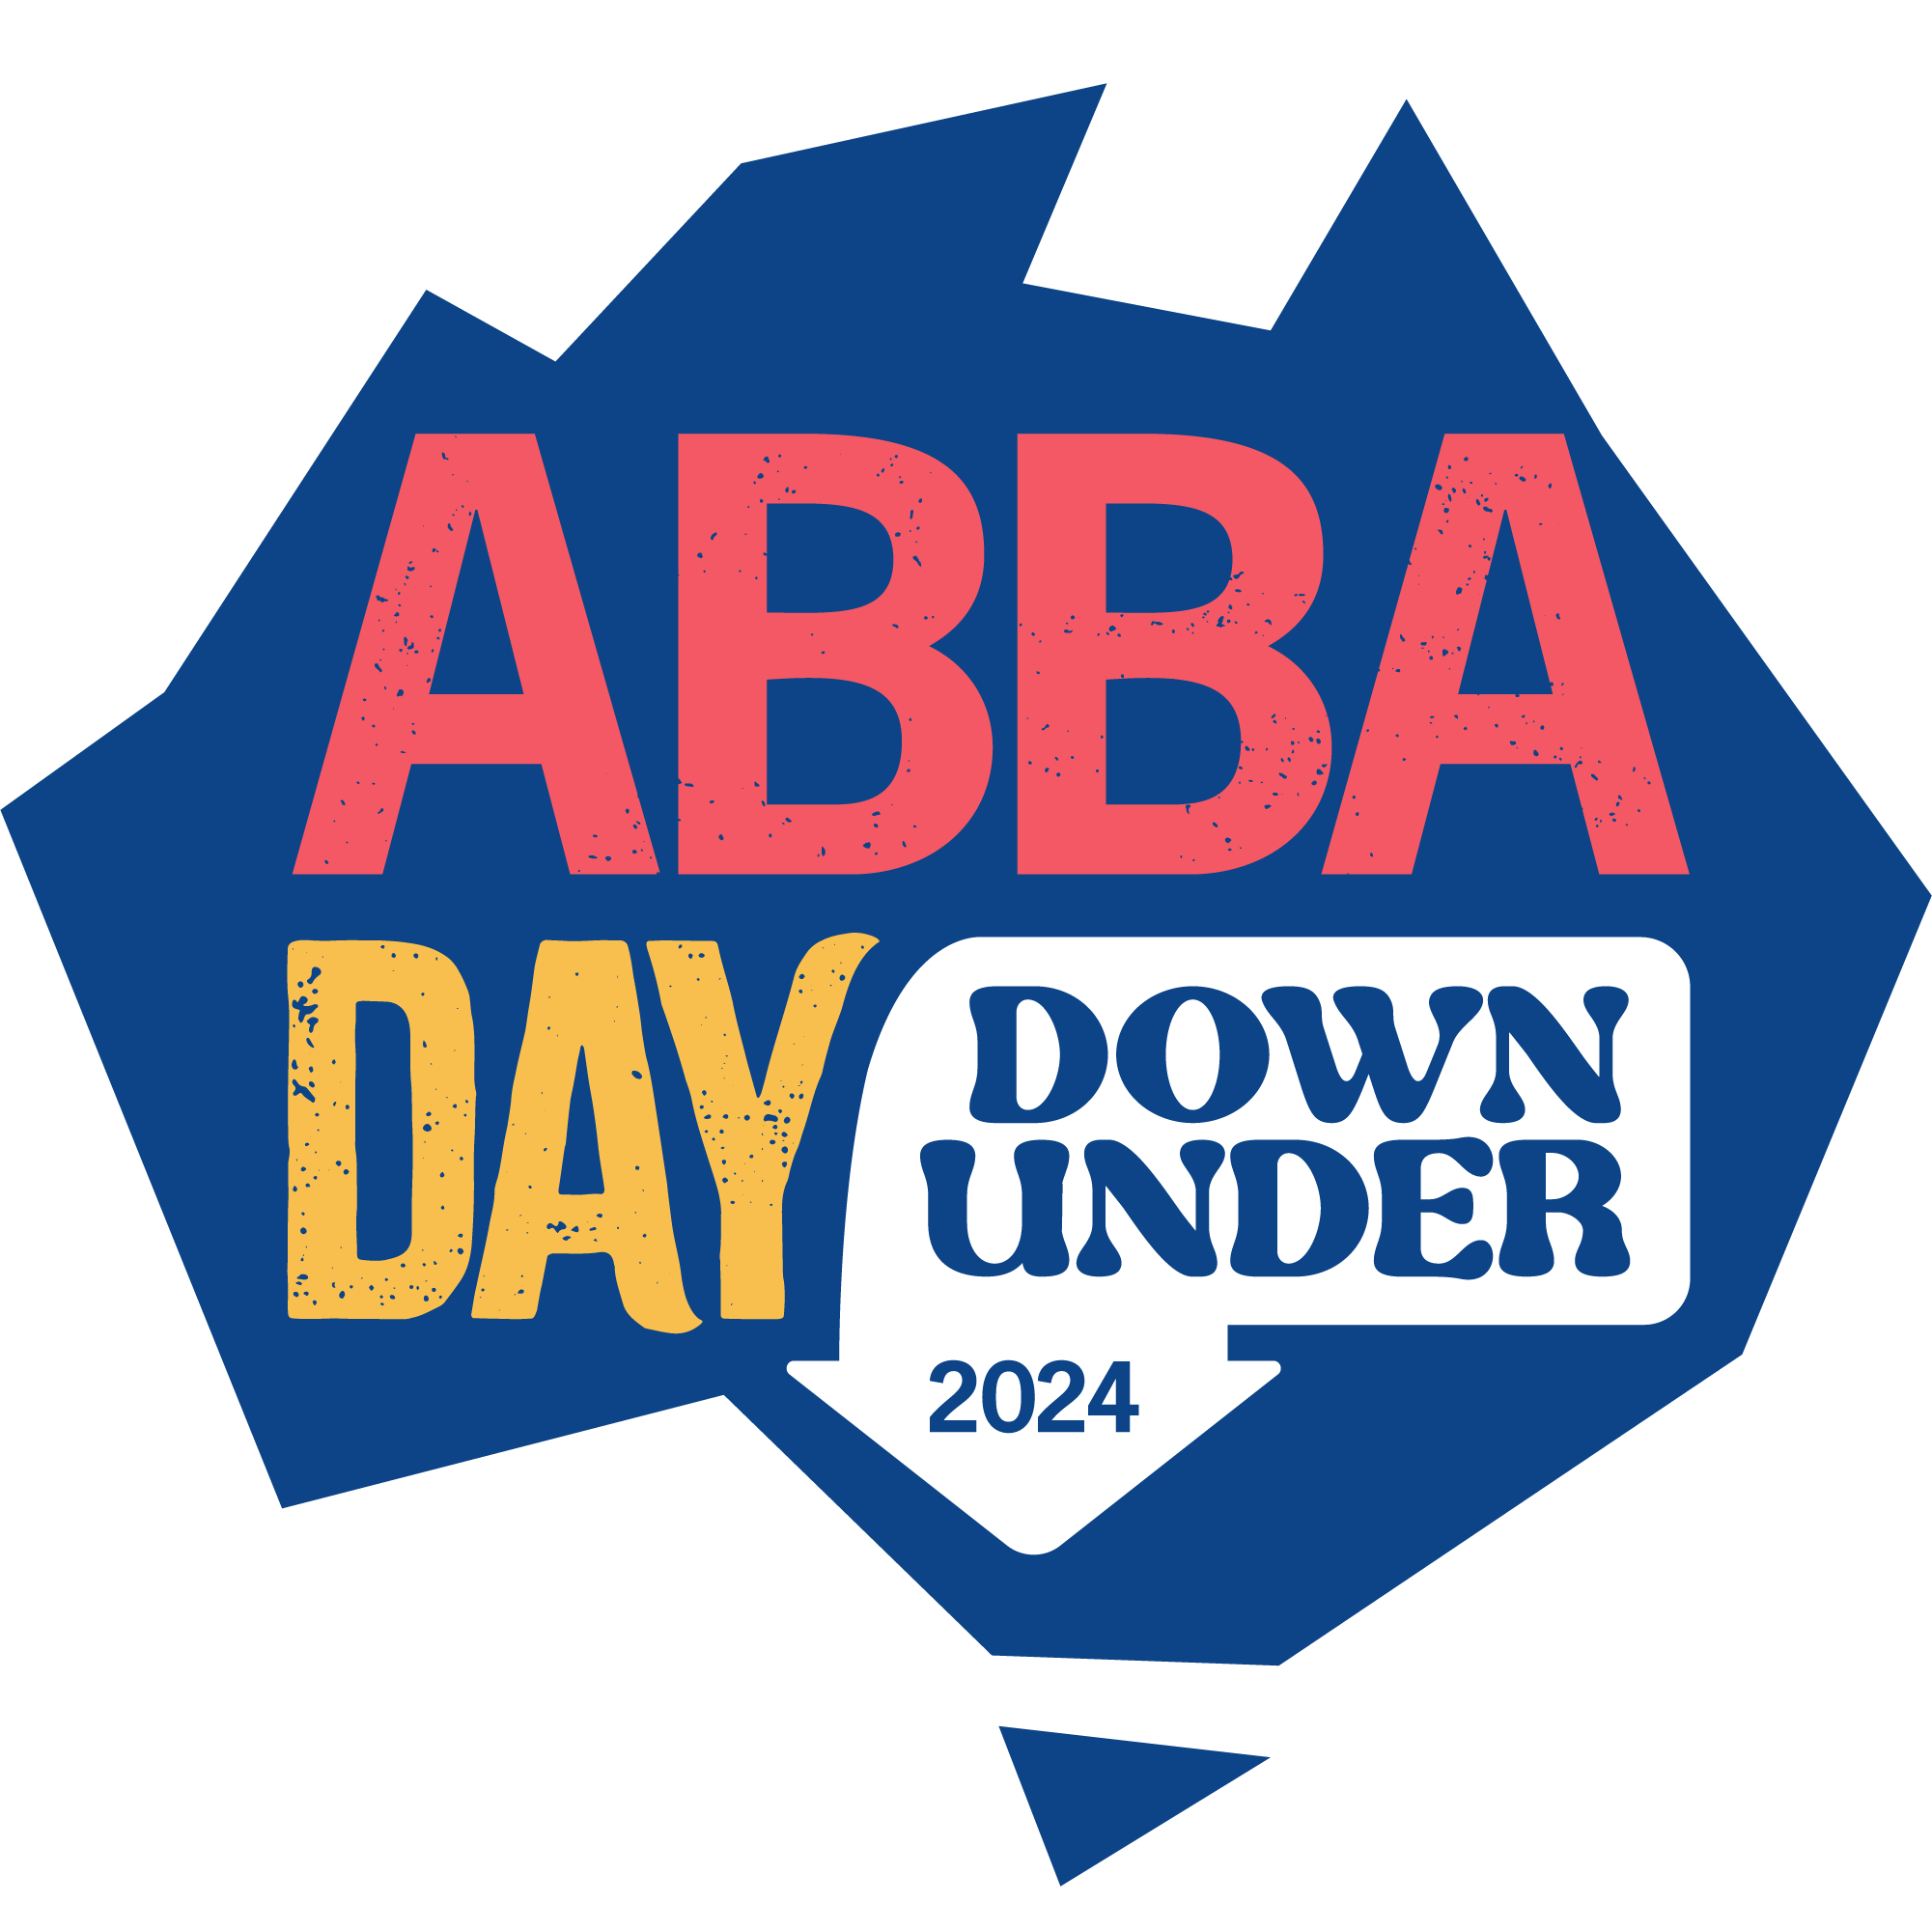 ABBA-Day-Downunder-2024-logo-colour-reversed-large